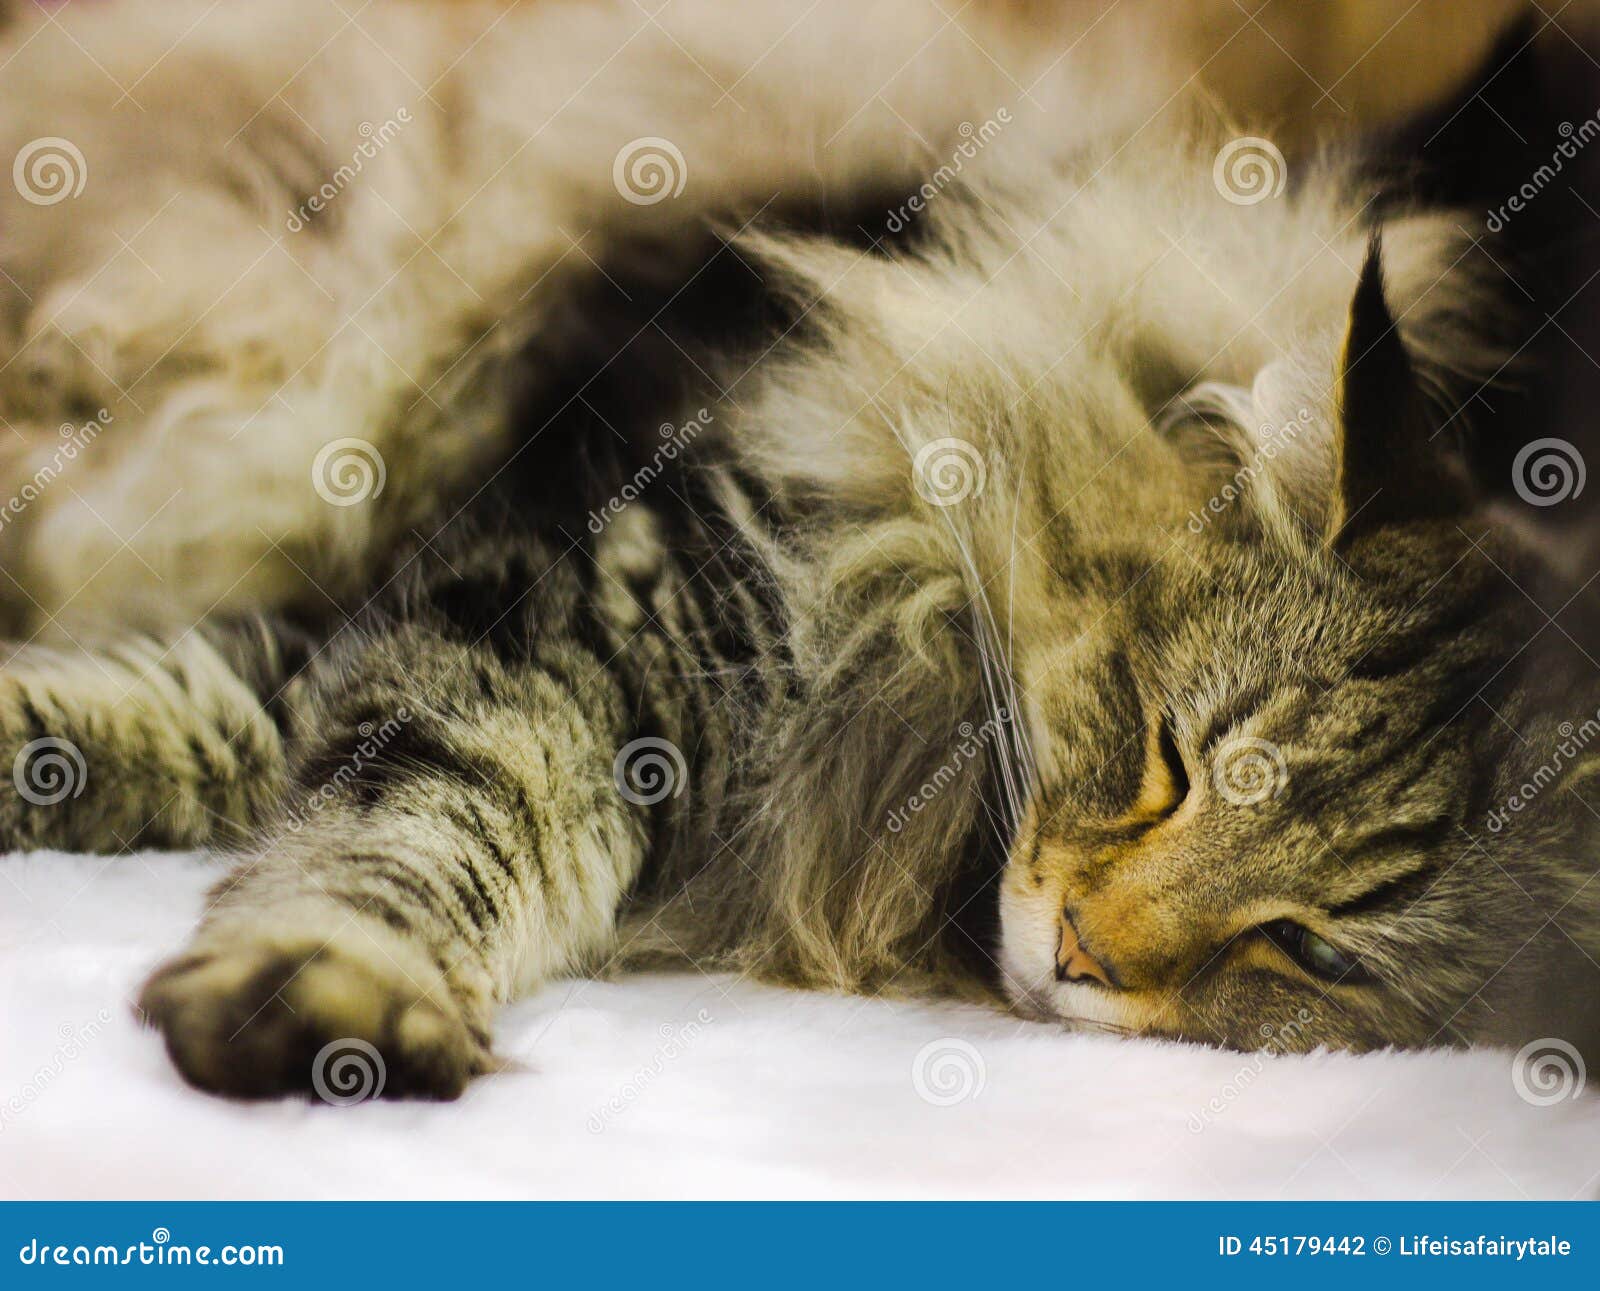 30,232 Sleeping Animals Stock Photos - Free & Royalty-Free Stock Photos  from Dreamstime